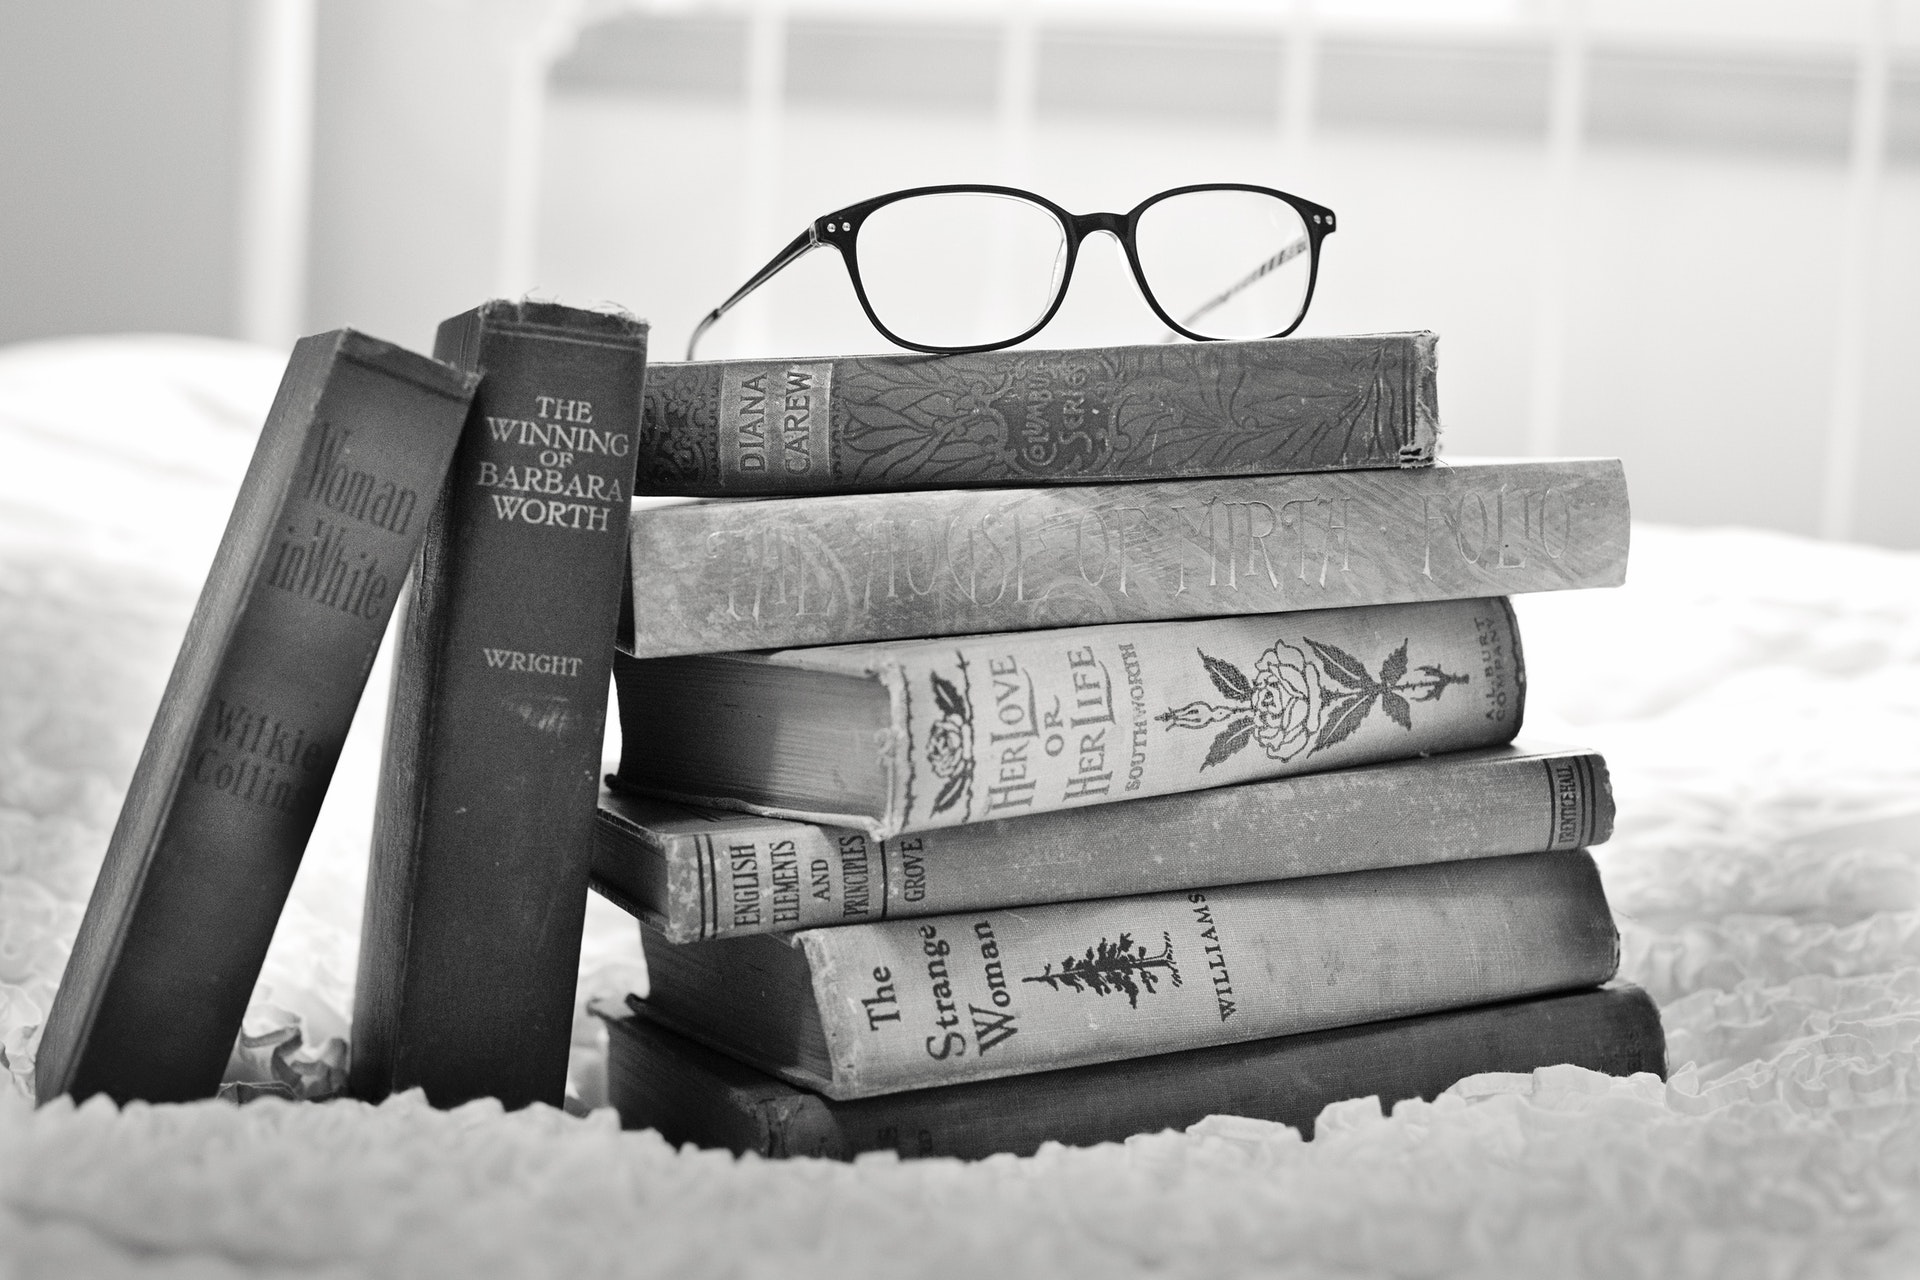 A pair of glasses sit on top of a stack of 6 books